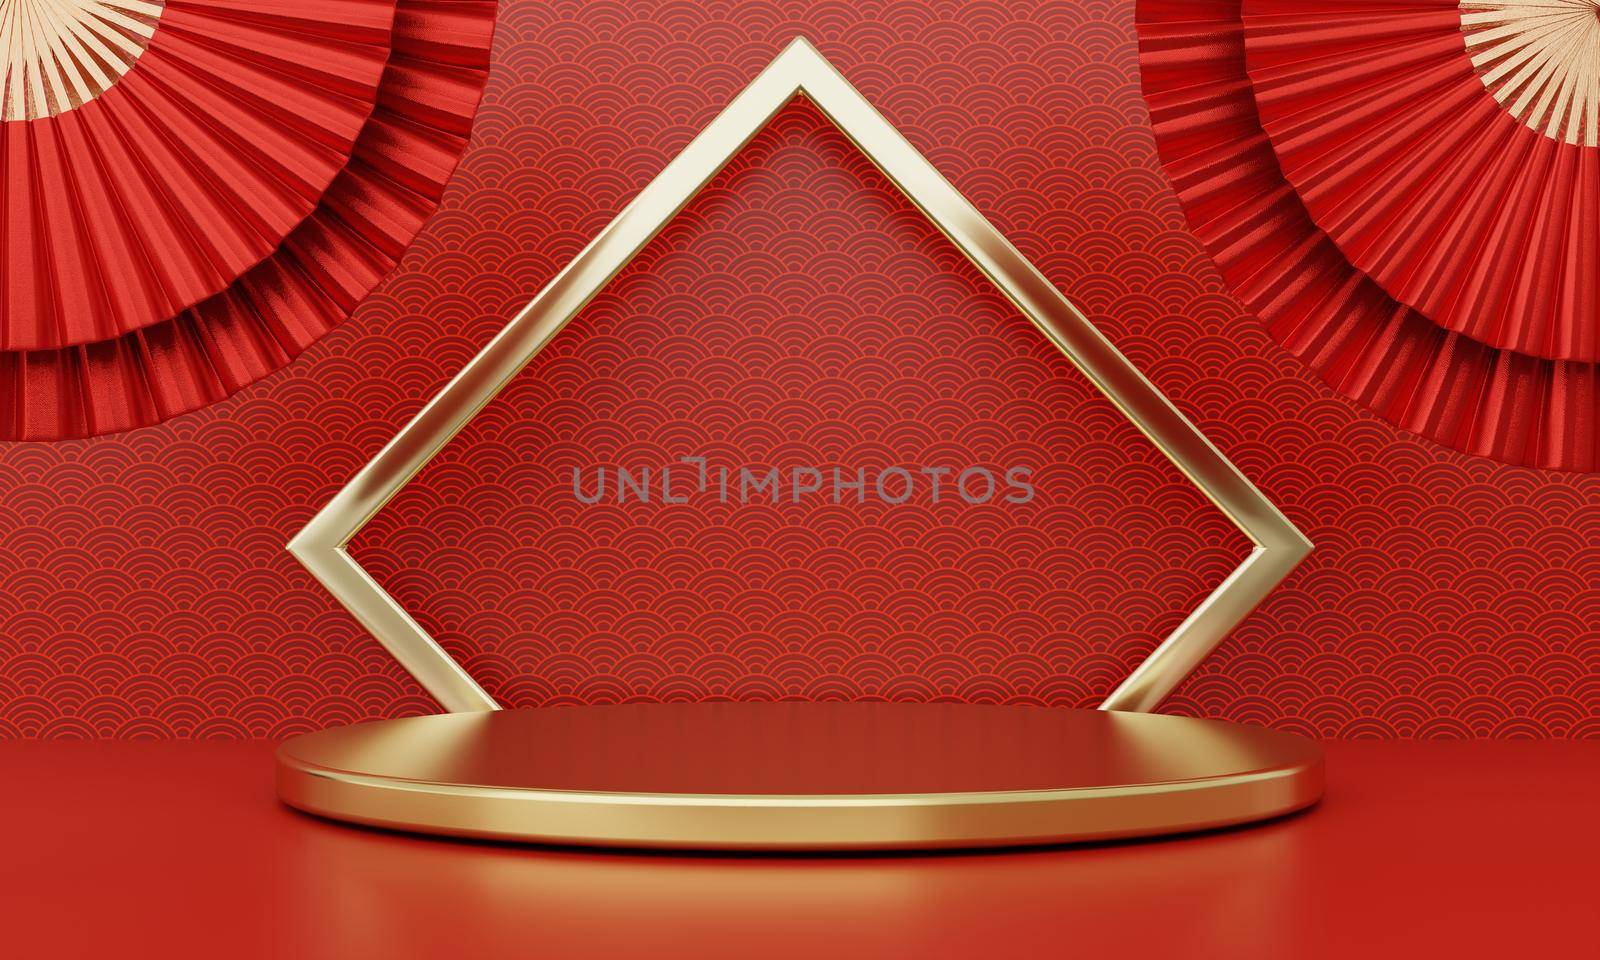 Chinese New Year red modern style one podium product showcase with golden ring frame and China pattern background. Happy holiday traditional festival concept. 3D illustration rendering graphic design by MiniStocker